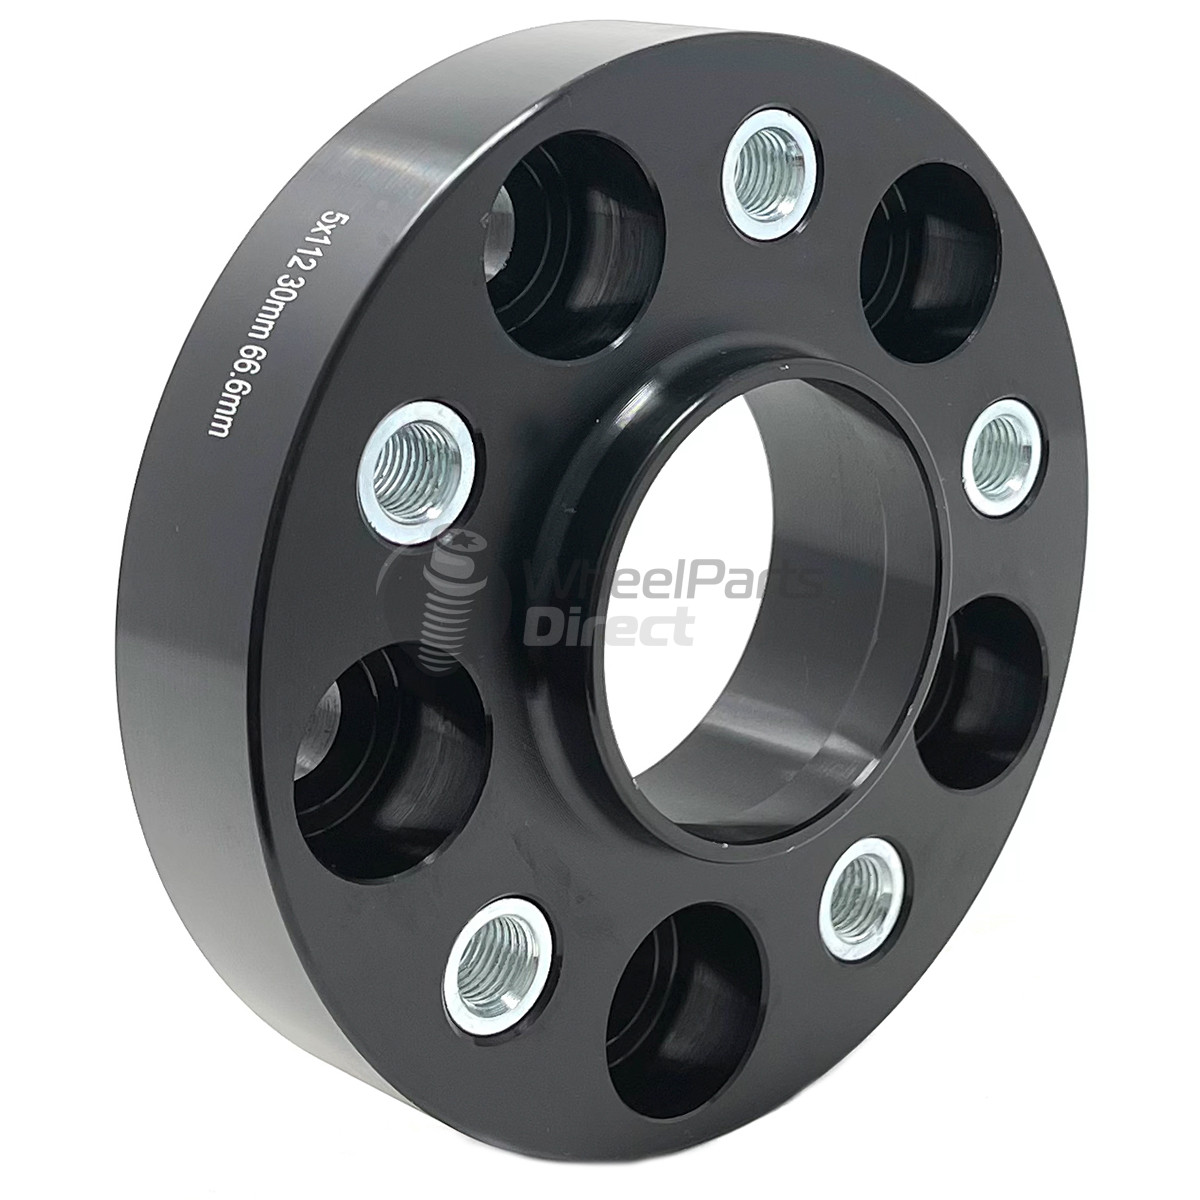 5x112 66.6 30mm GEN2 Bolt-On-Bolts Wheel Spacers